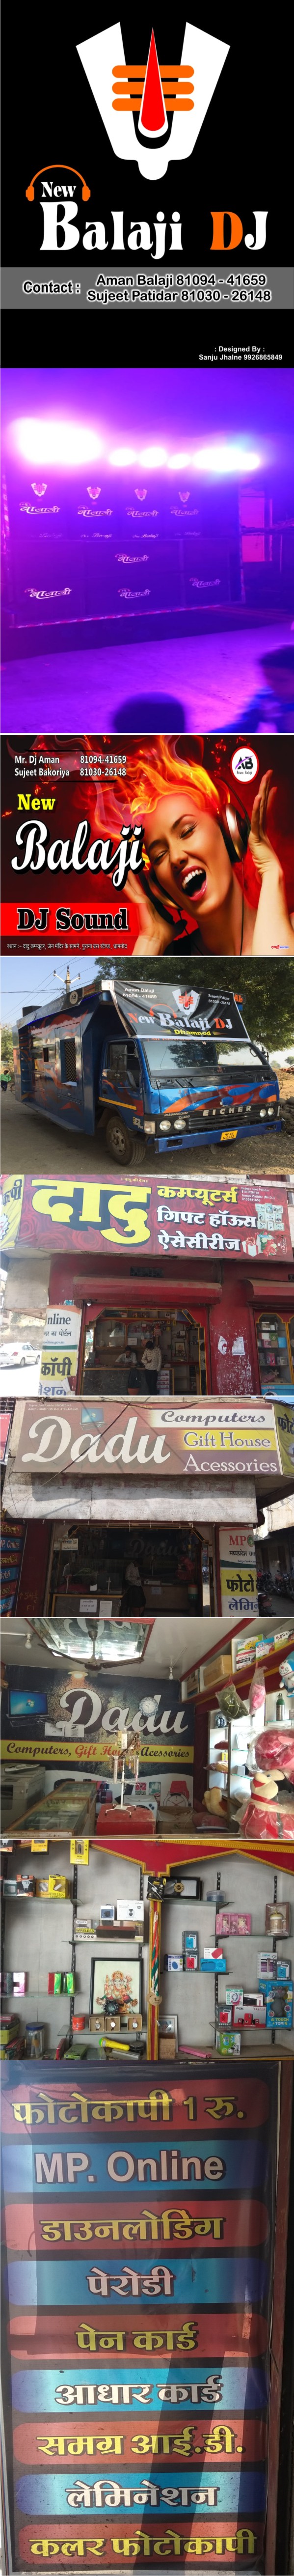 DADU COMPUTERS AND GIFT CENTER AND MP ONLINE